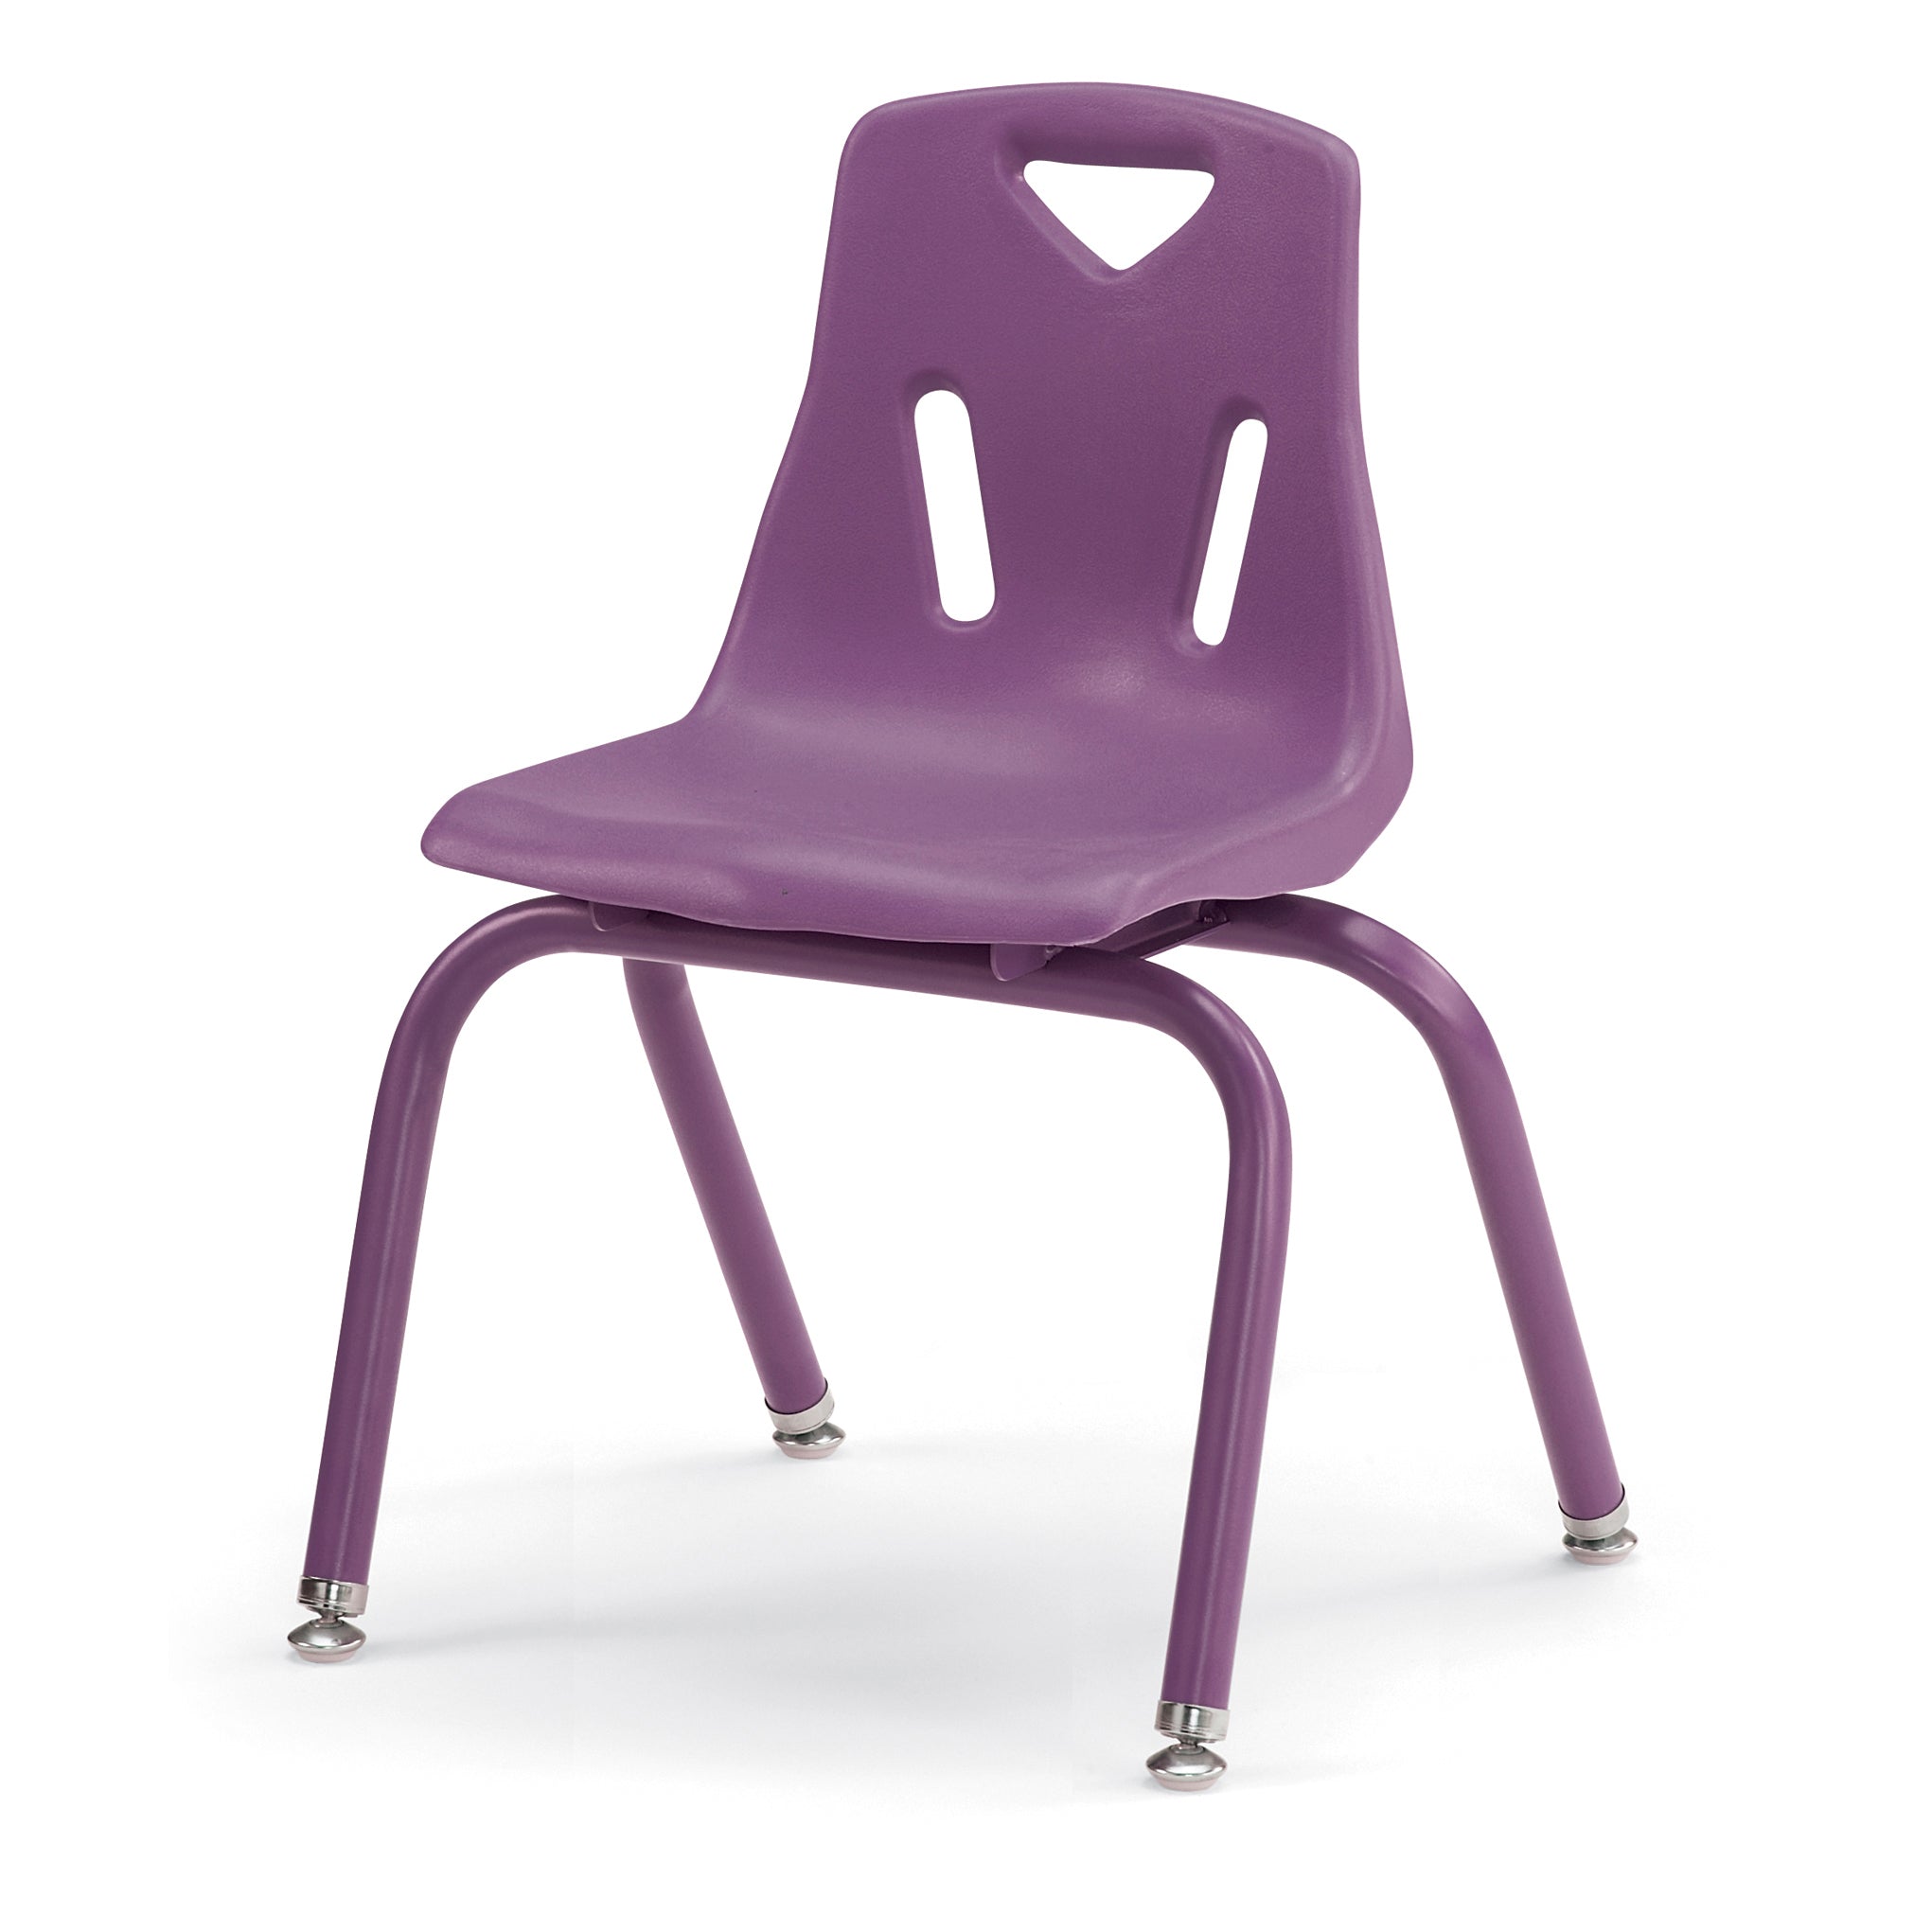 8124JC1004, Berries Stacking Chair with Powder-Coated Legs - 14" Ht - Purple